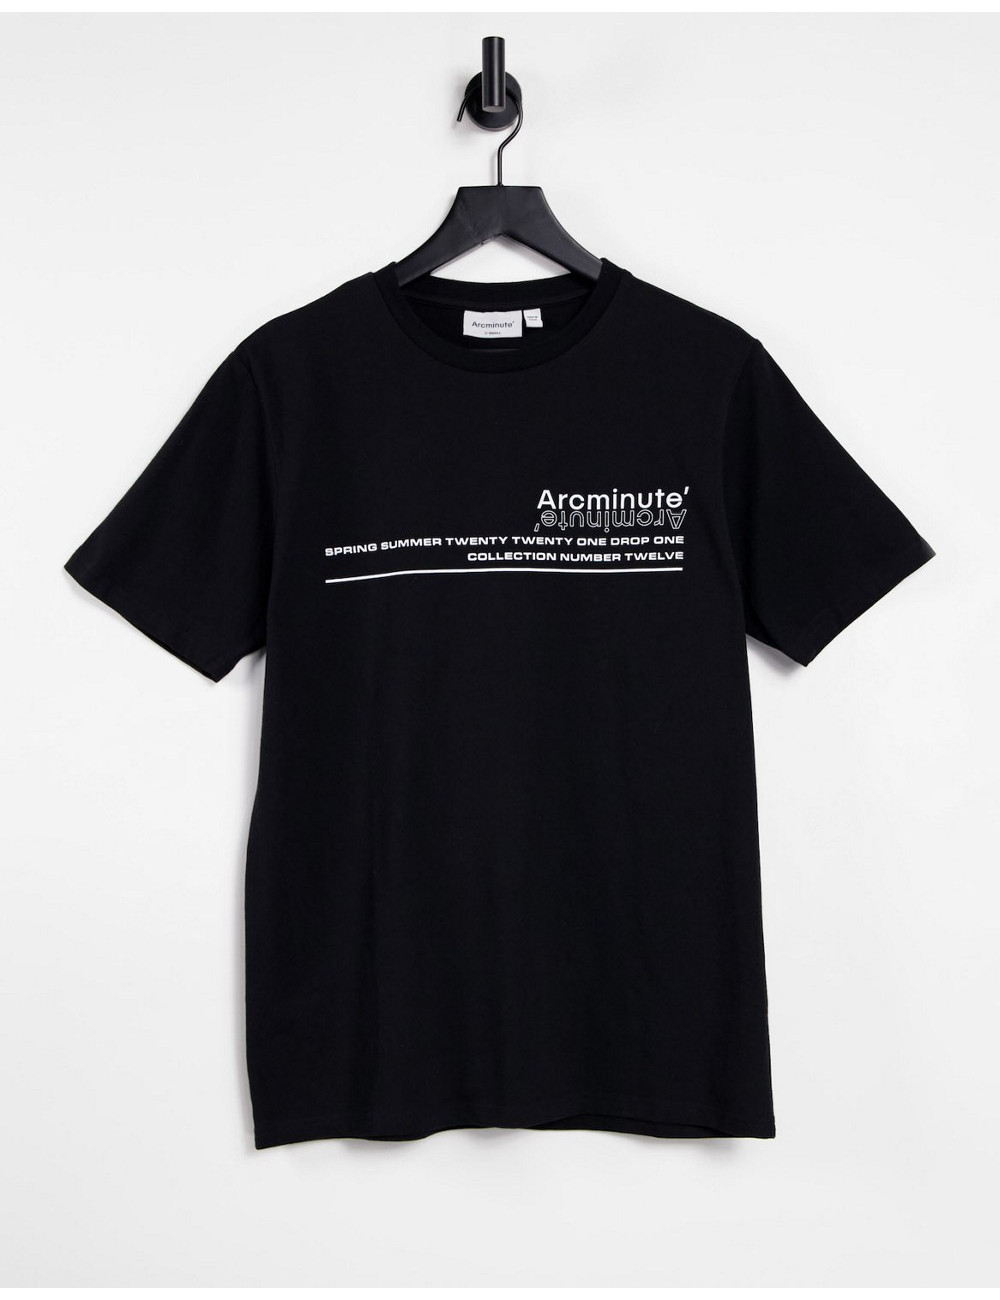 Arcminute branded logo...